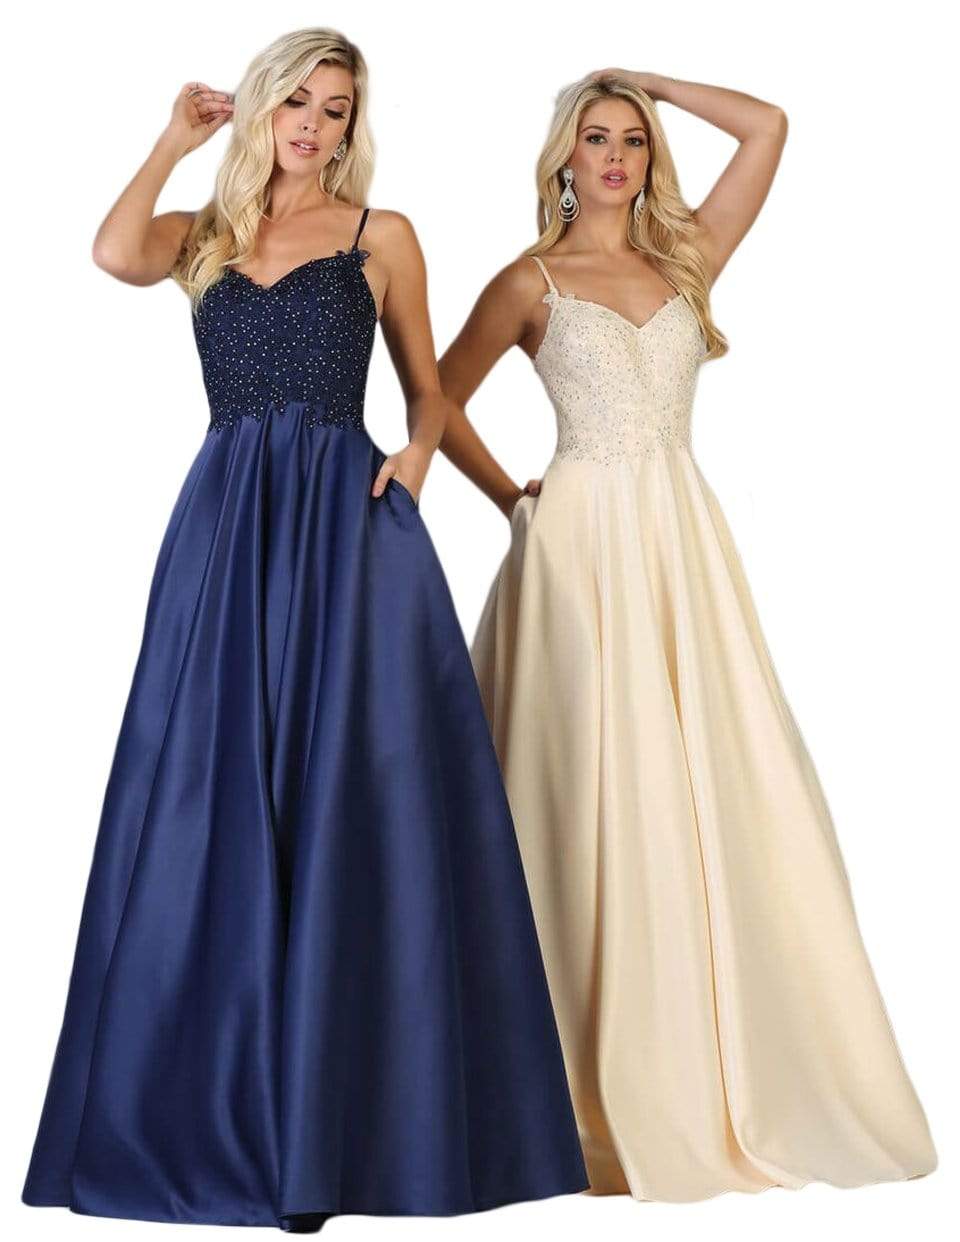 May Queen - MQ1685 Sleeveless Beaded Mesh Lace Back A-Line Satin Gown Bridesmaid Dresses 4 / Navy